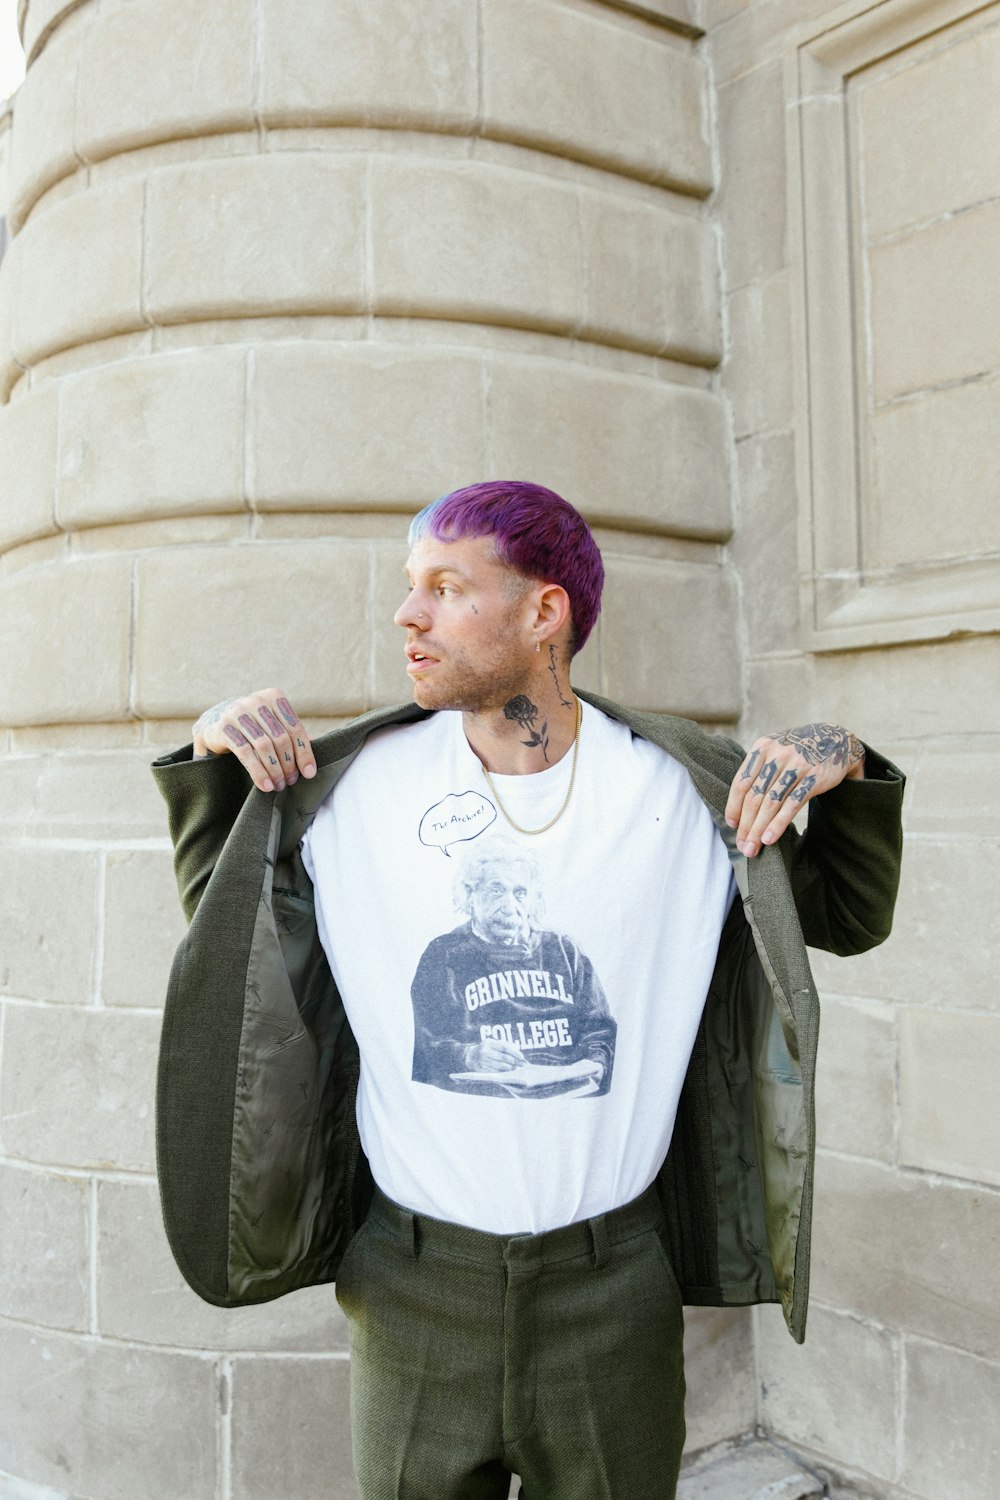 a man with purple hair wearing a white shirt and green pants